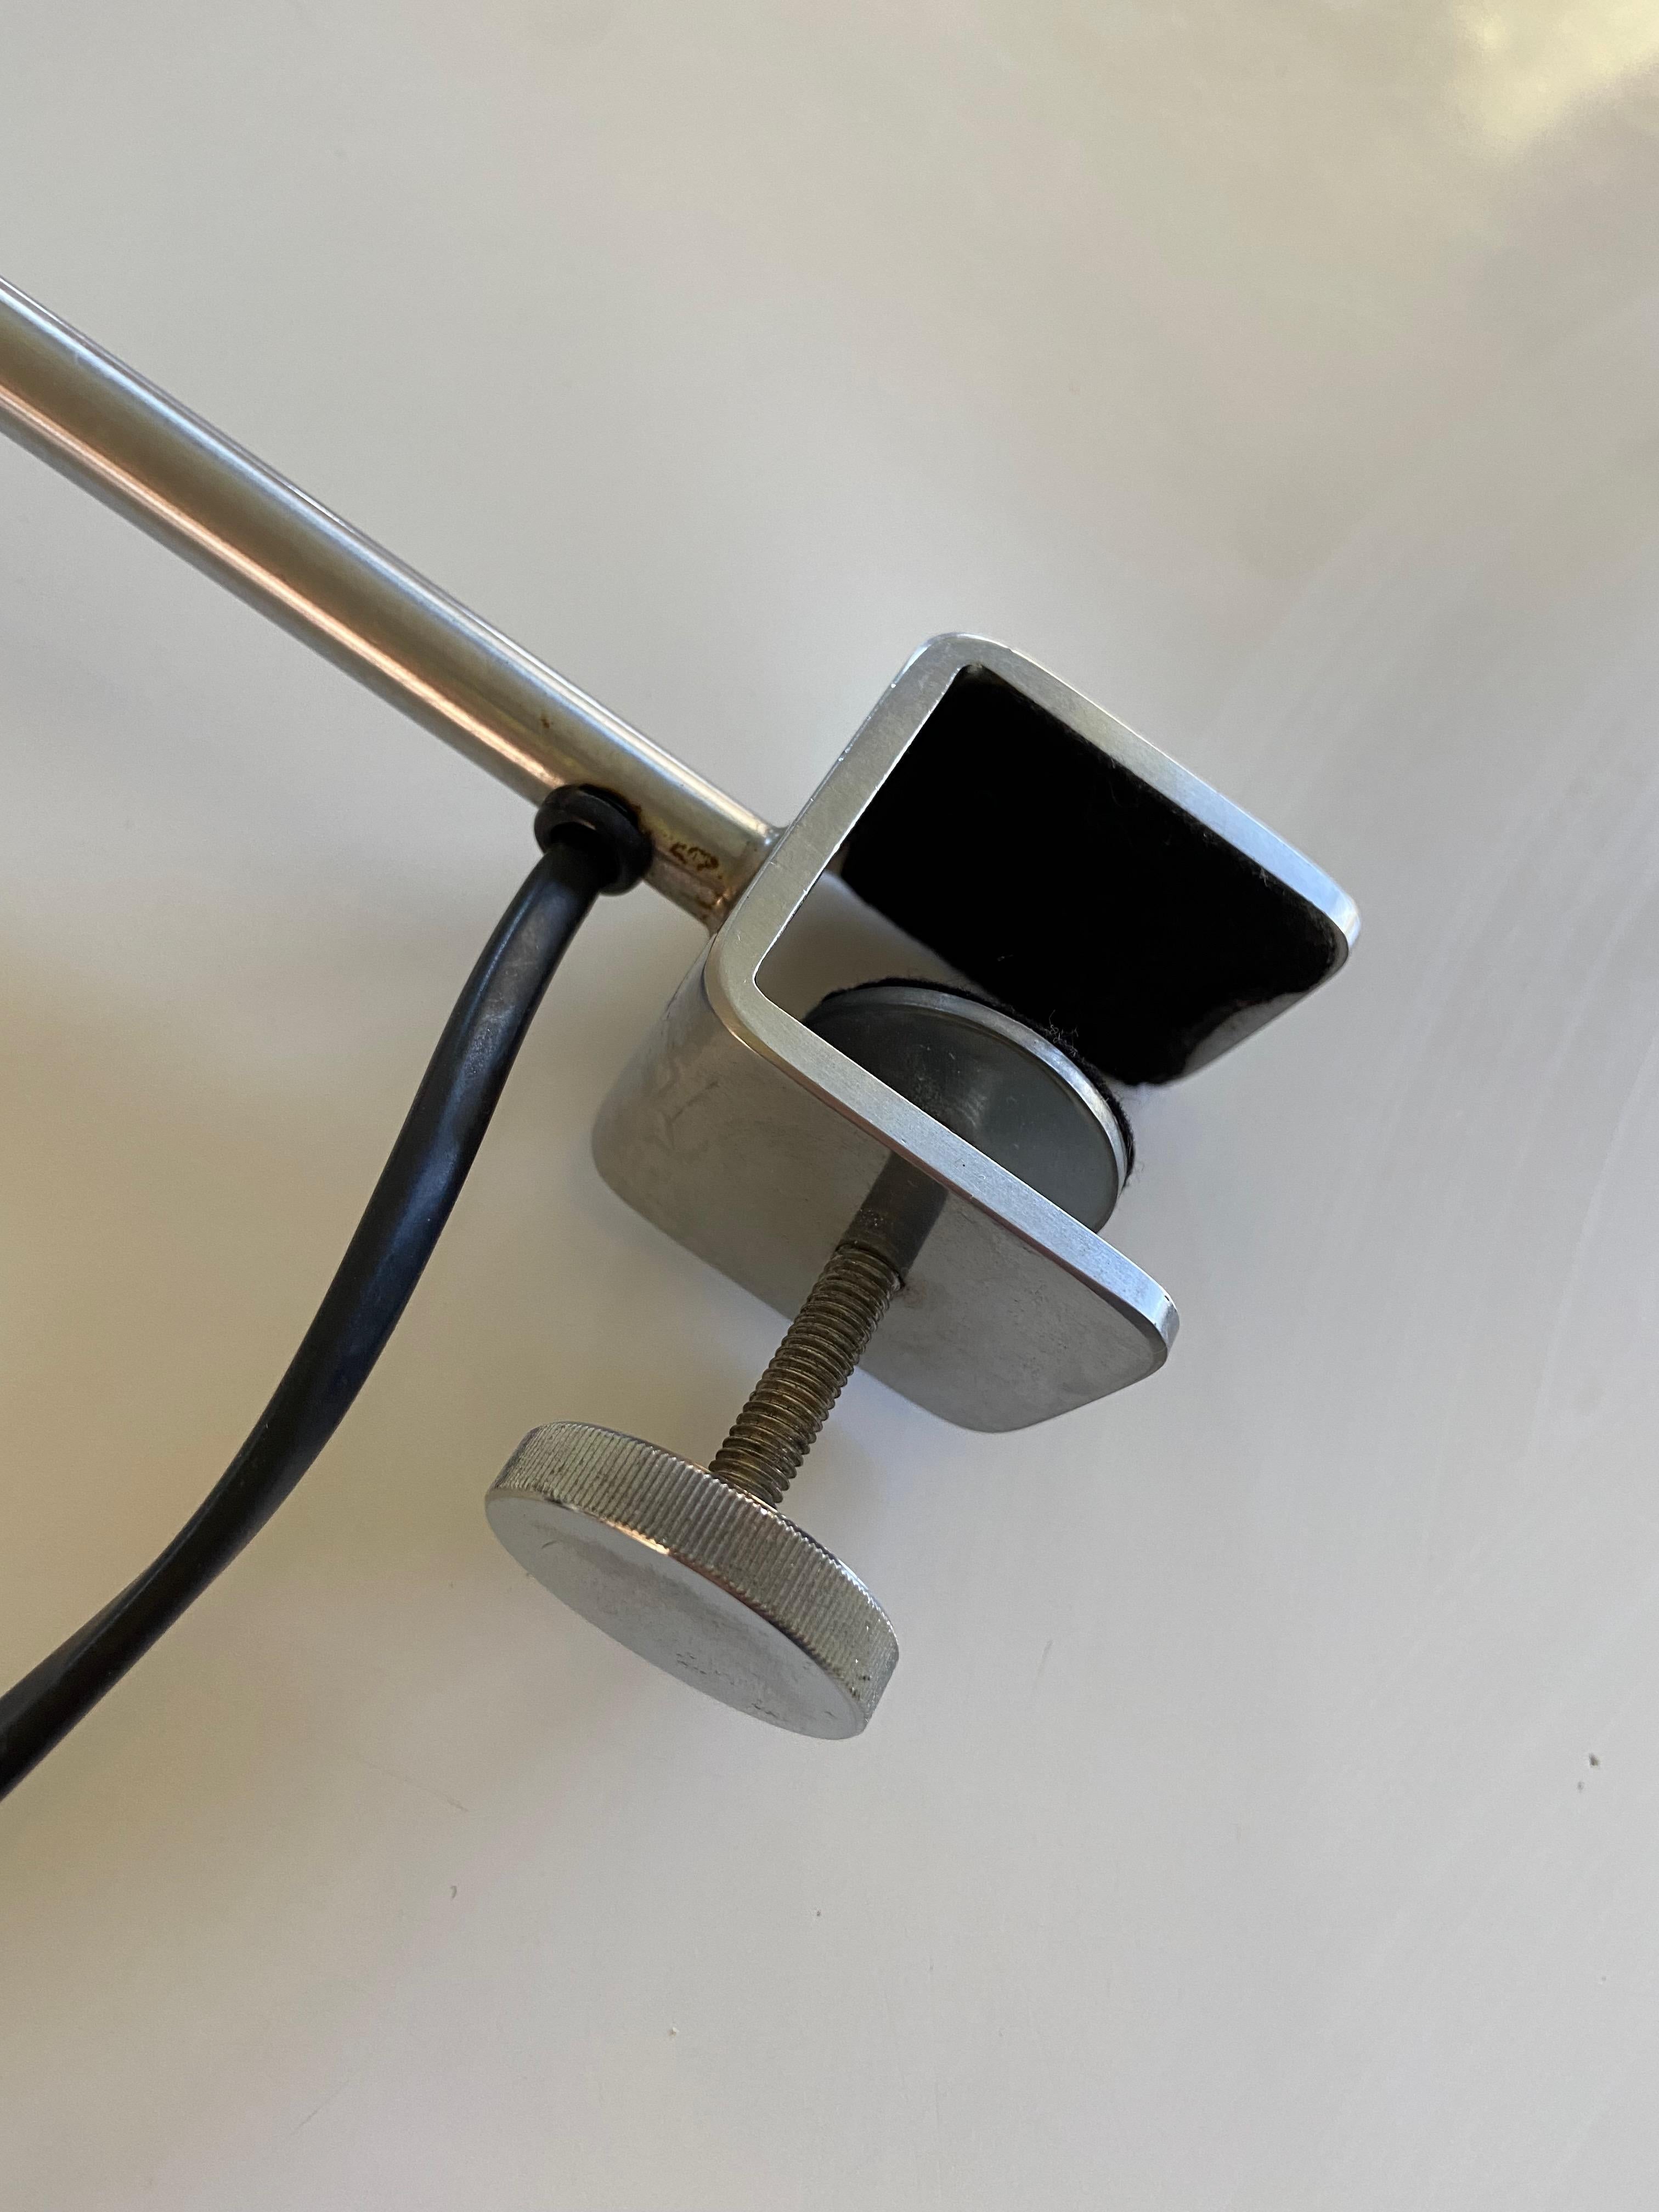 Metal Clamp Spot Lamp by Lad Team for Swiss Lamps International, Zürich 1970s For Sale